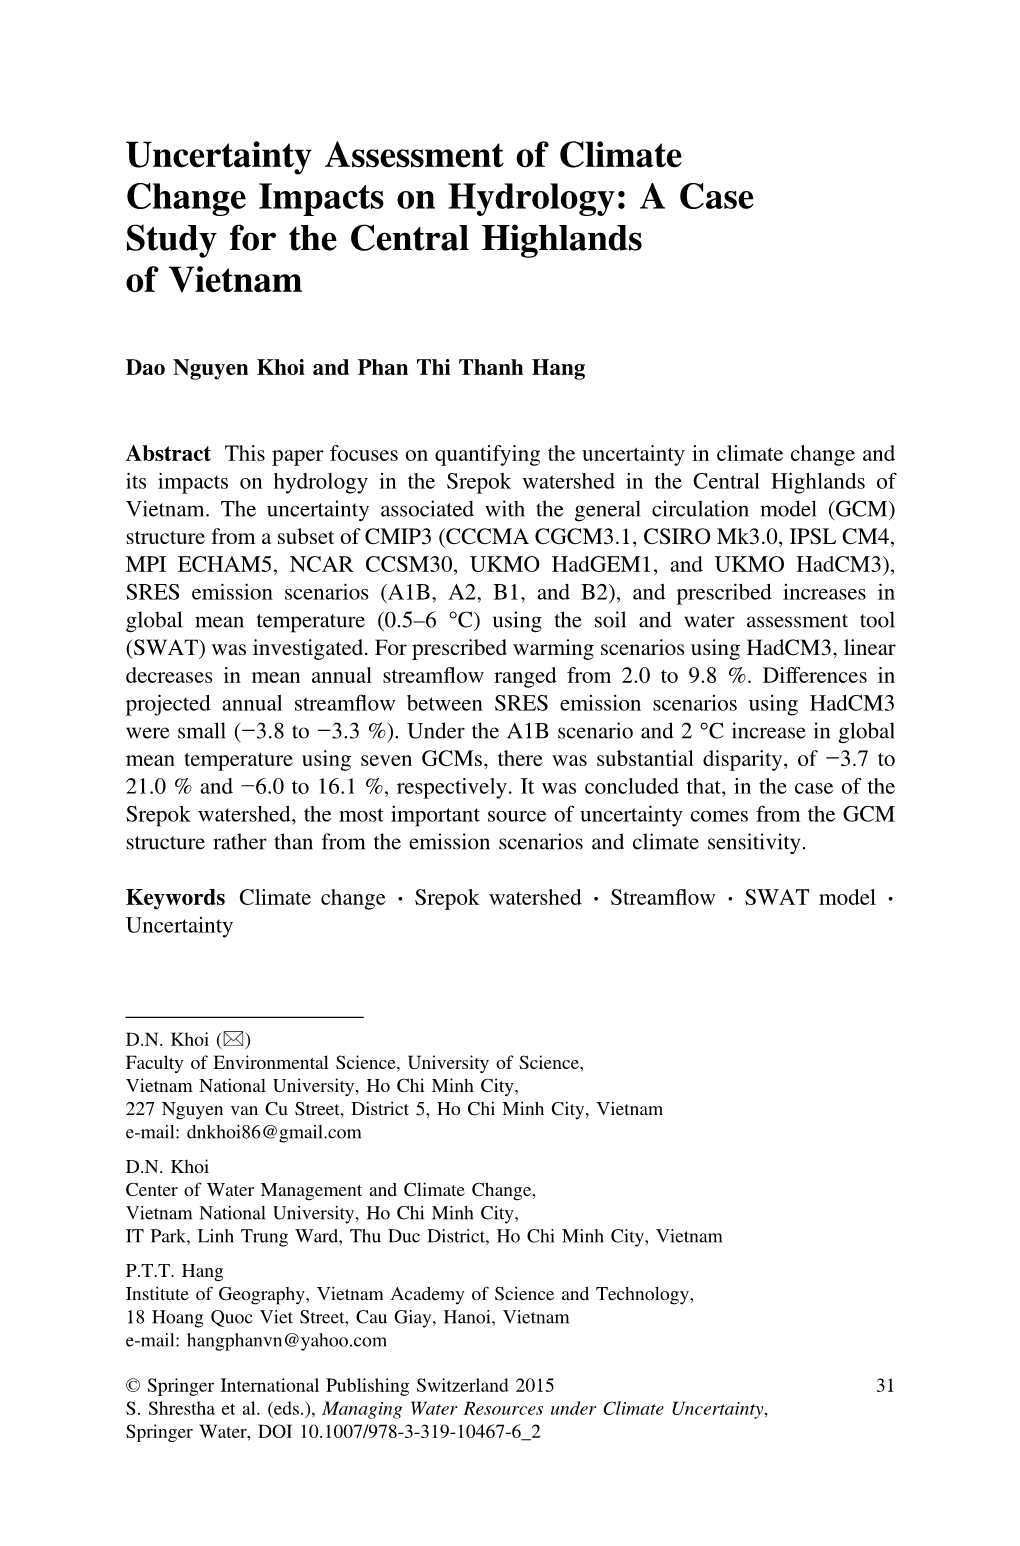 Uncertainty Assessment of Climate Change Impacts on Hydrology: a Case Study for the Central Highlands of Vietnam